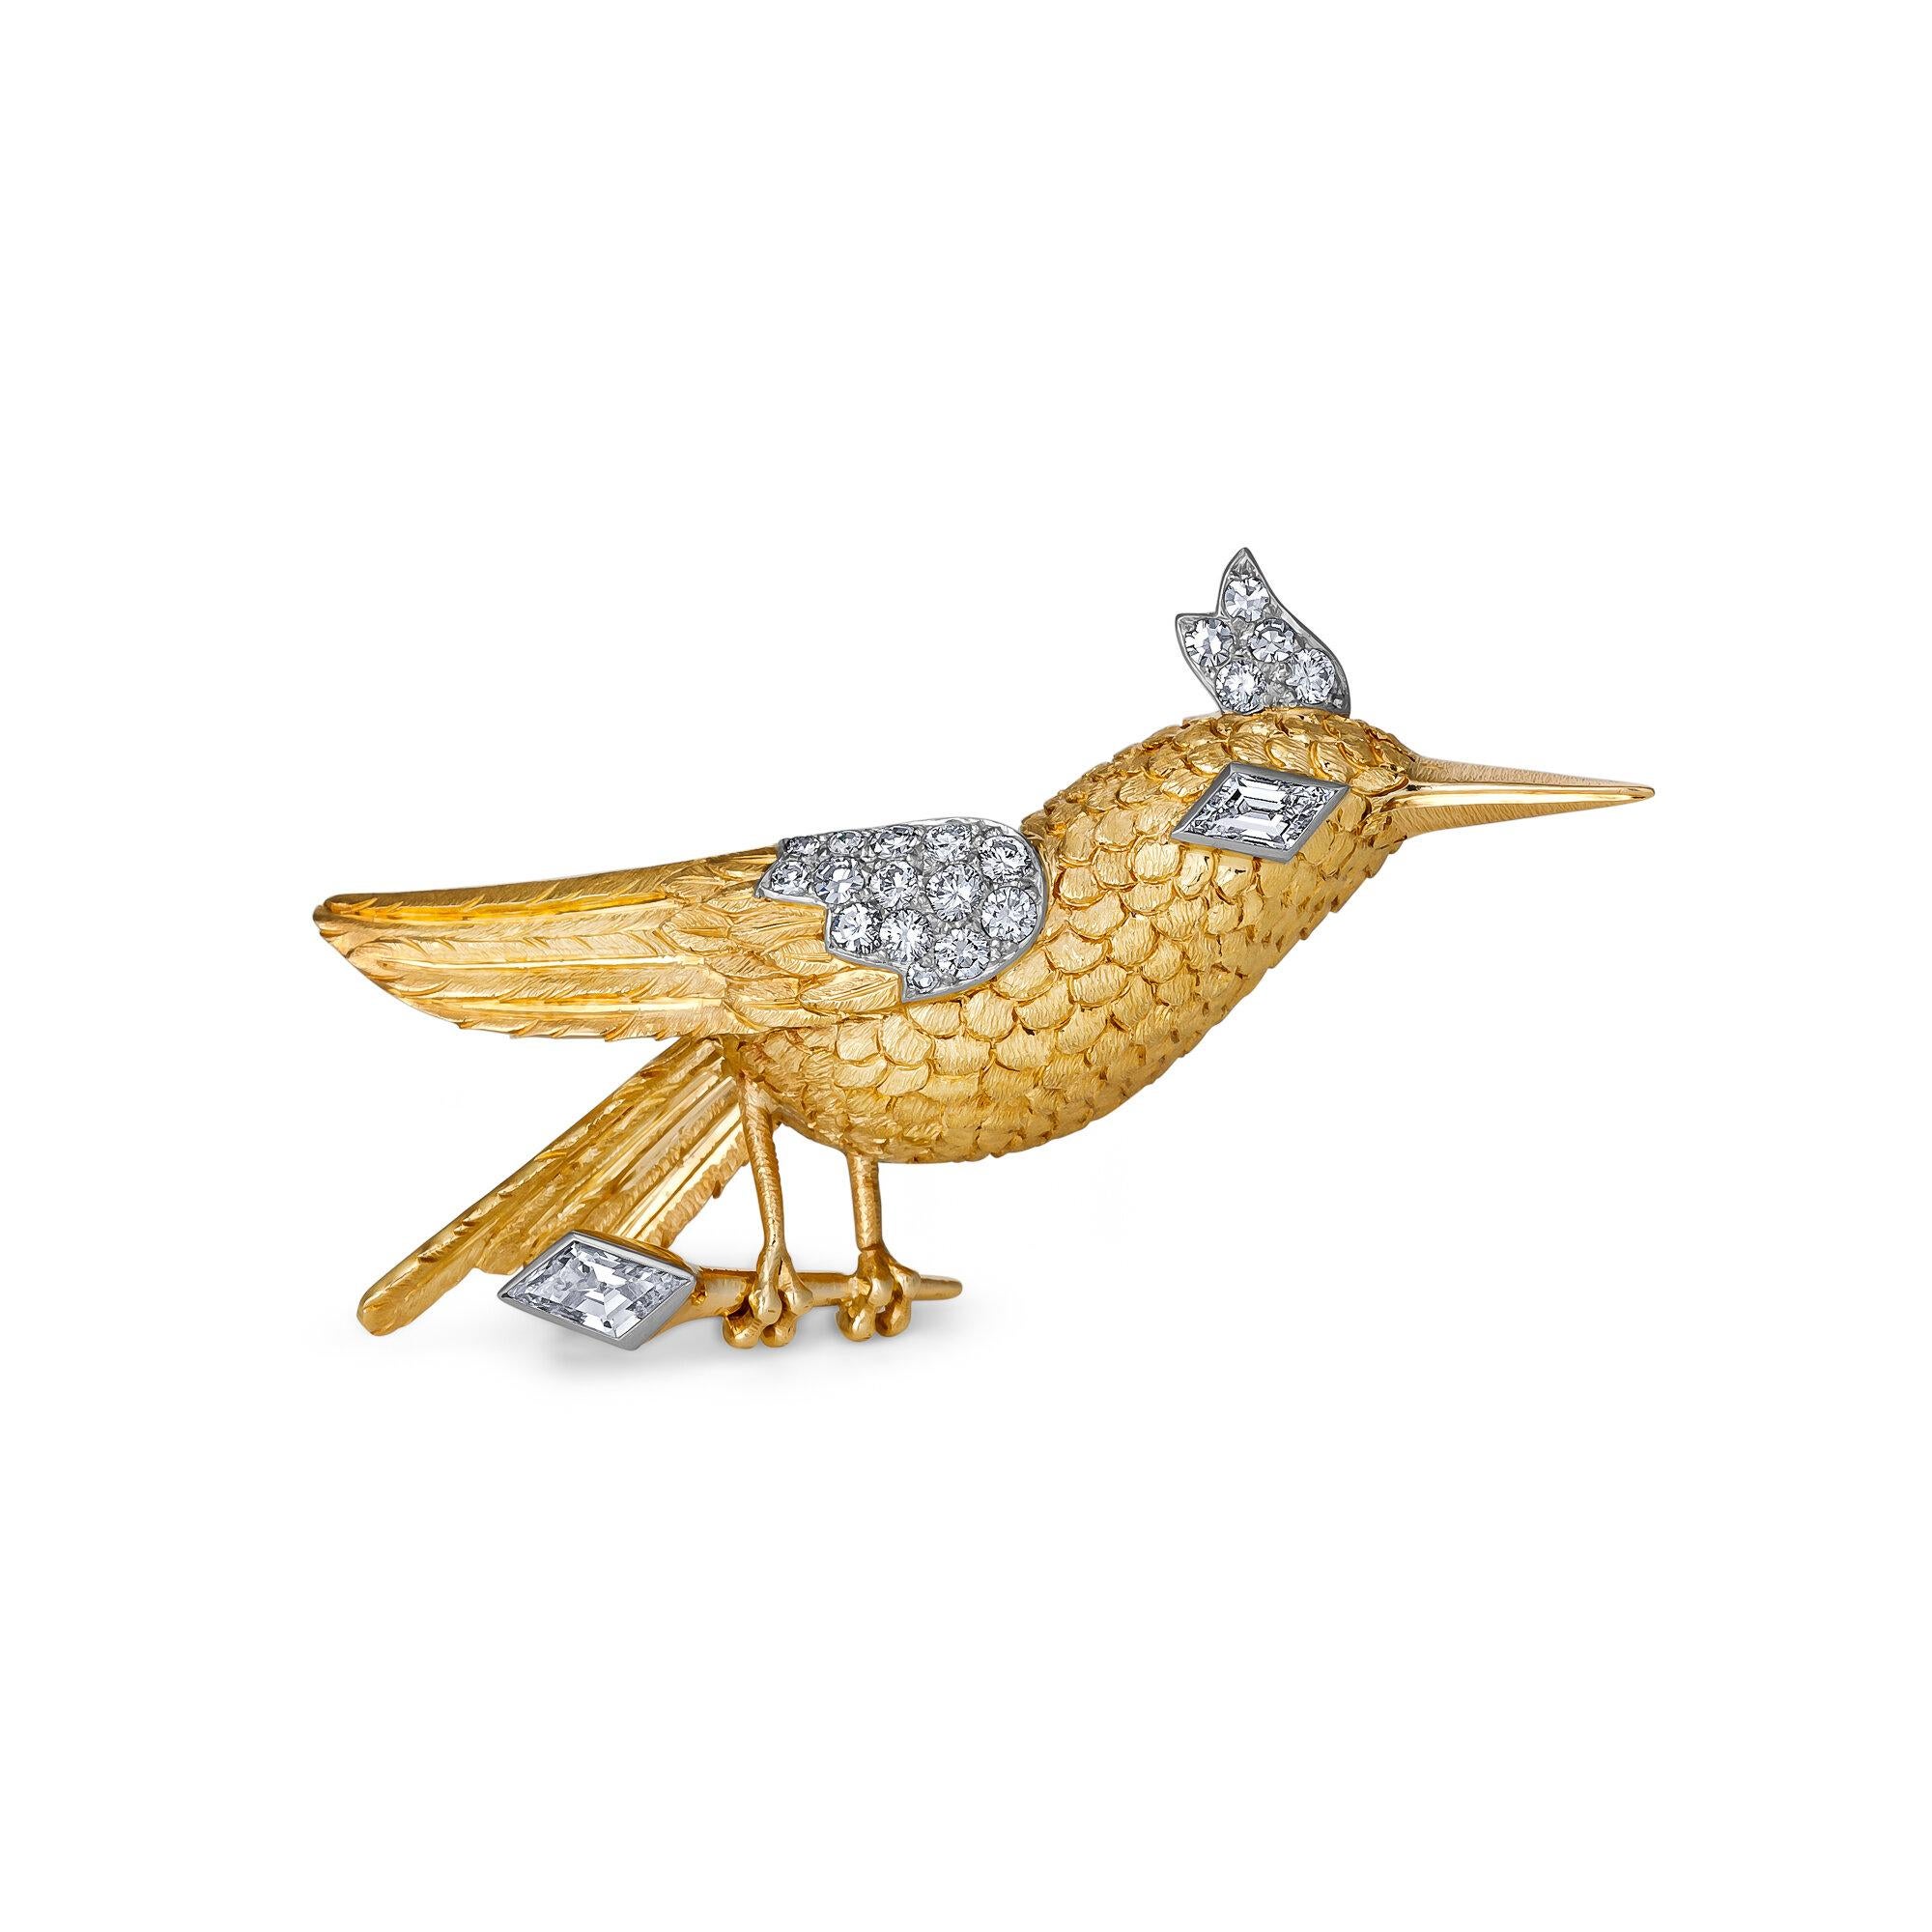 The hummingbird is known to visit an average of 1000 flowers per day in search of nectar, and when wearing this exquisitely crafted and elegantly designed Cartier Paris Diamond, platinum, and Gold Hummingbird pin, you will vividly taste the